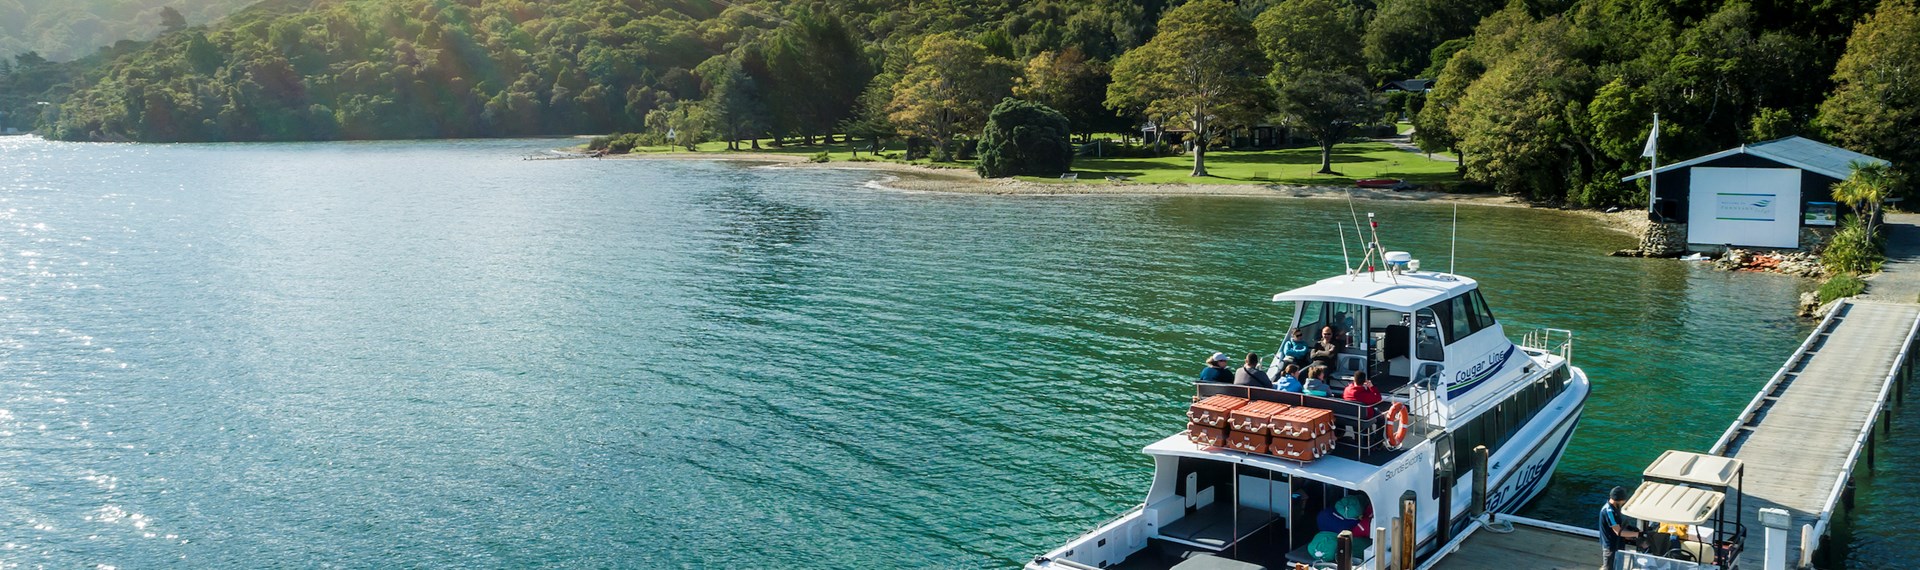 A Cougar Line boat tied up to the jetty at Furneaux Lodge in Endeavour Inlet, Marlborough Sounds, New Zealand.